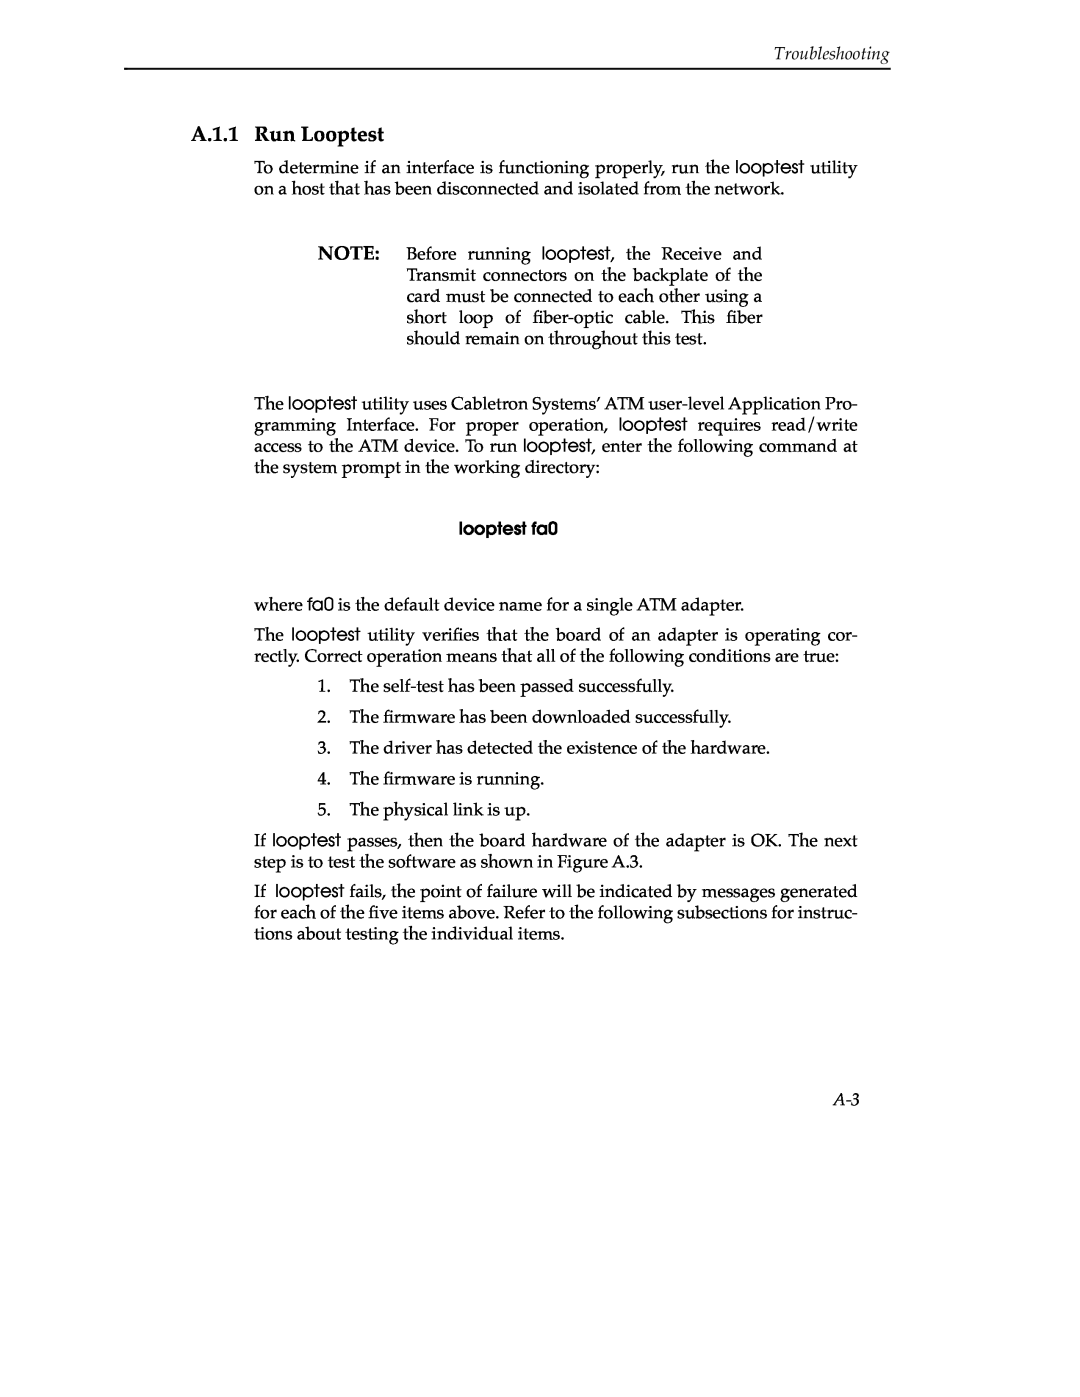 Cabletron Systems 9A000 manual A.1.1 Run Looptest, Troubleshooting 